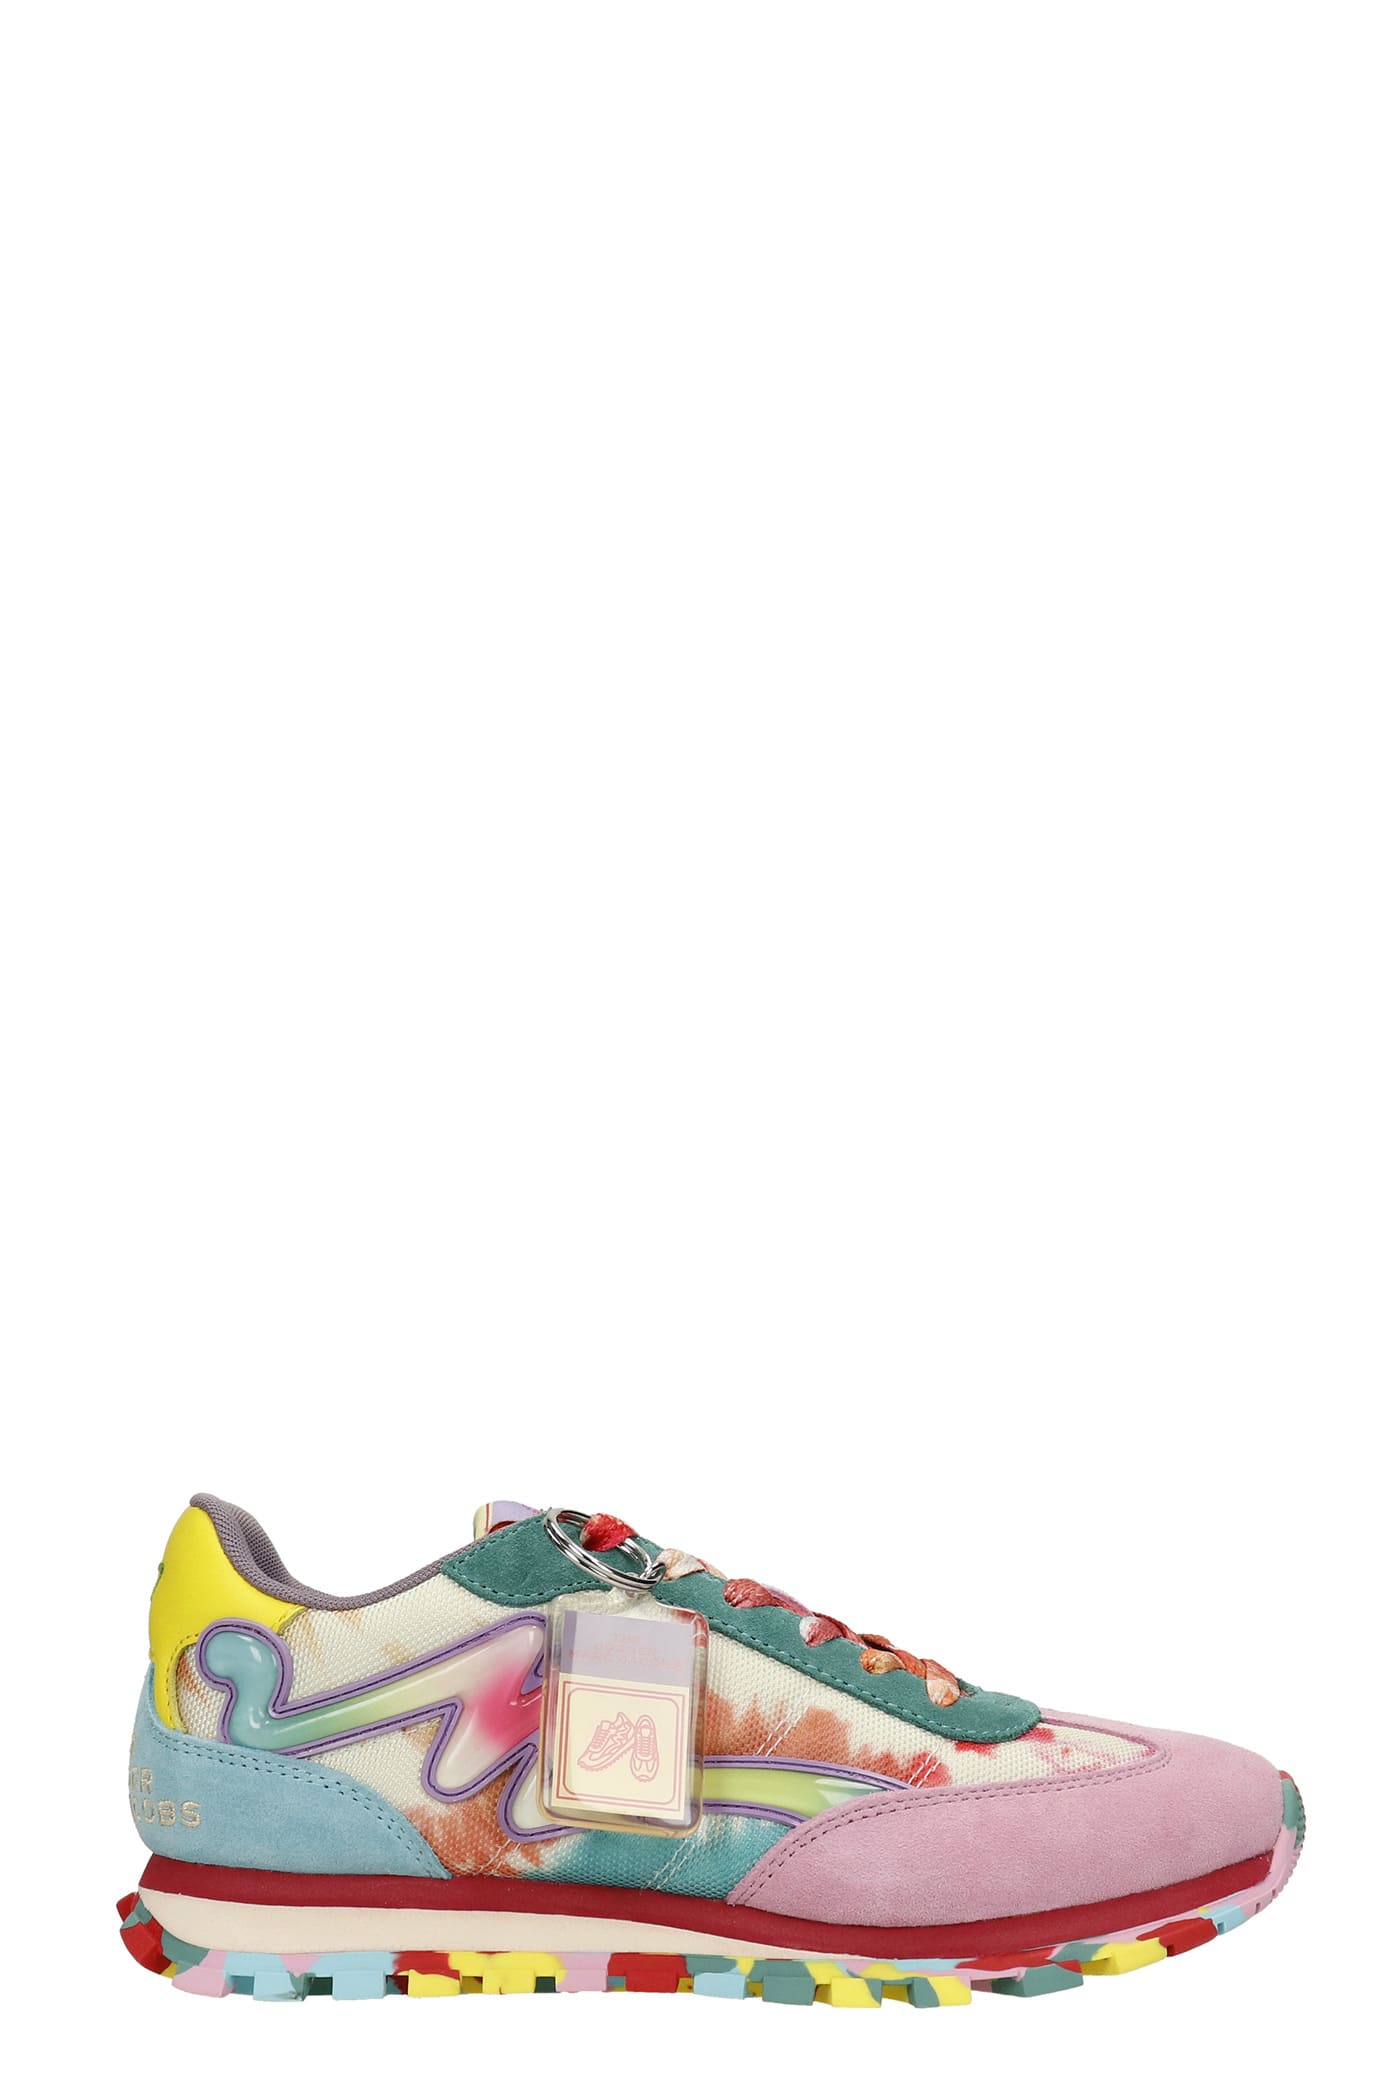 Marc Jacobs Sneakers In Multicolor Nylon